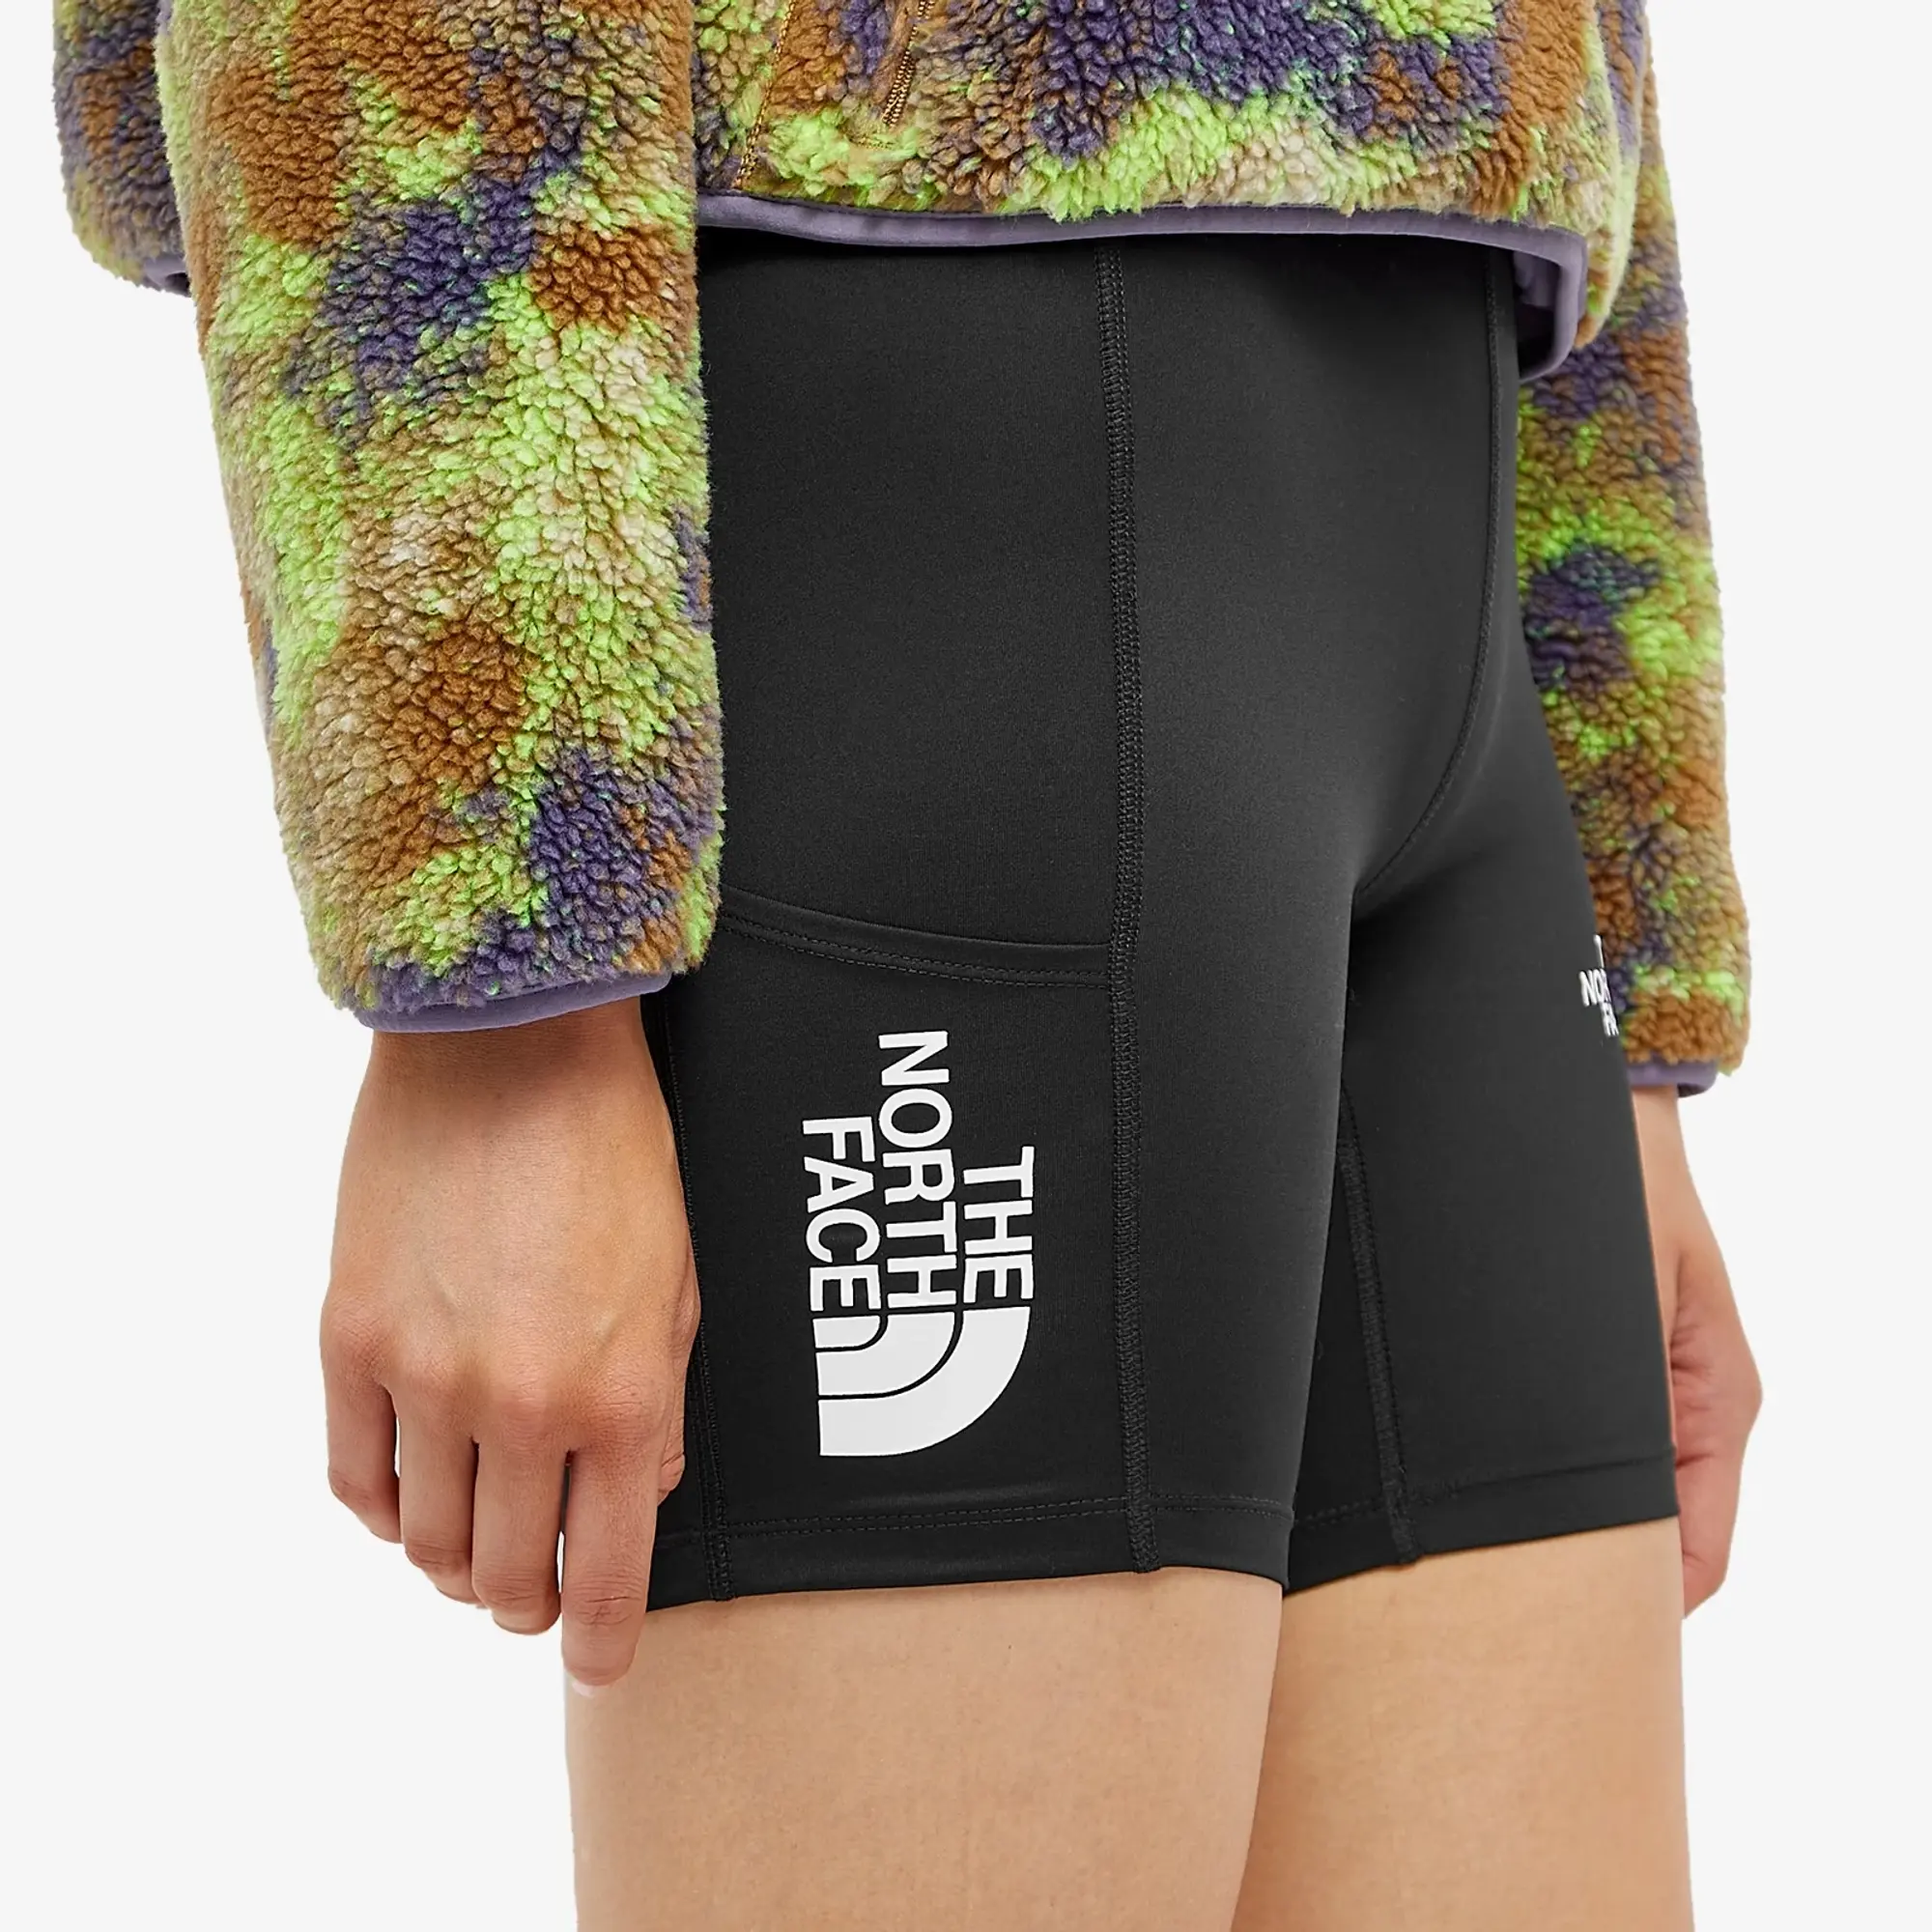 The North Face Women's Poly Knit Shorts Tnf Black